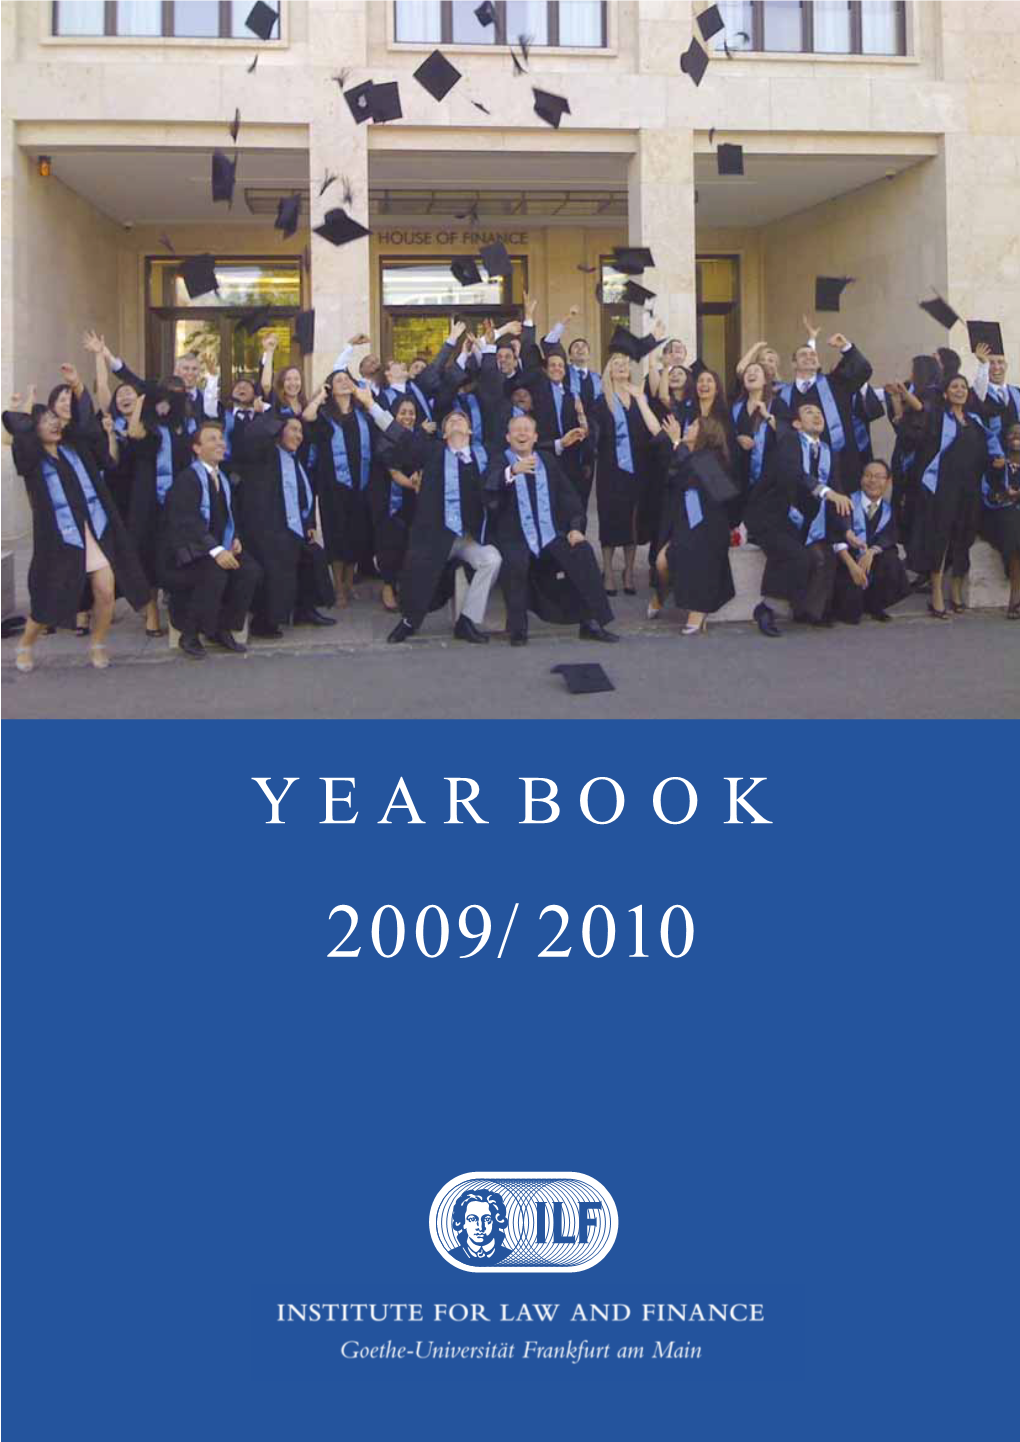 YEARBOOK 2009/2010 Contents